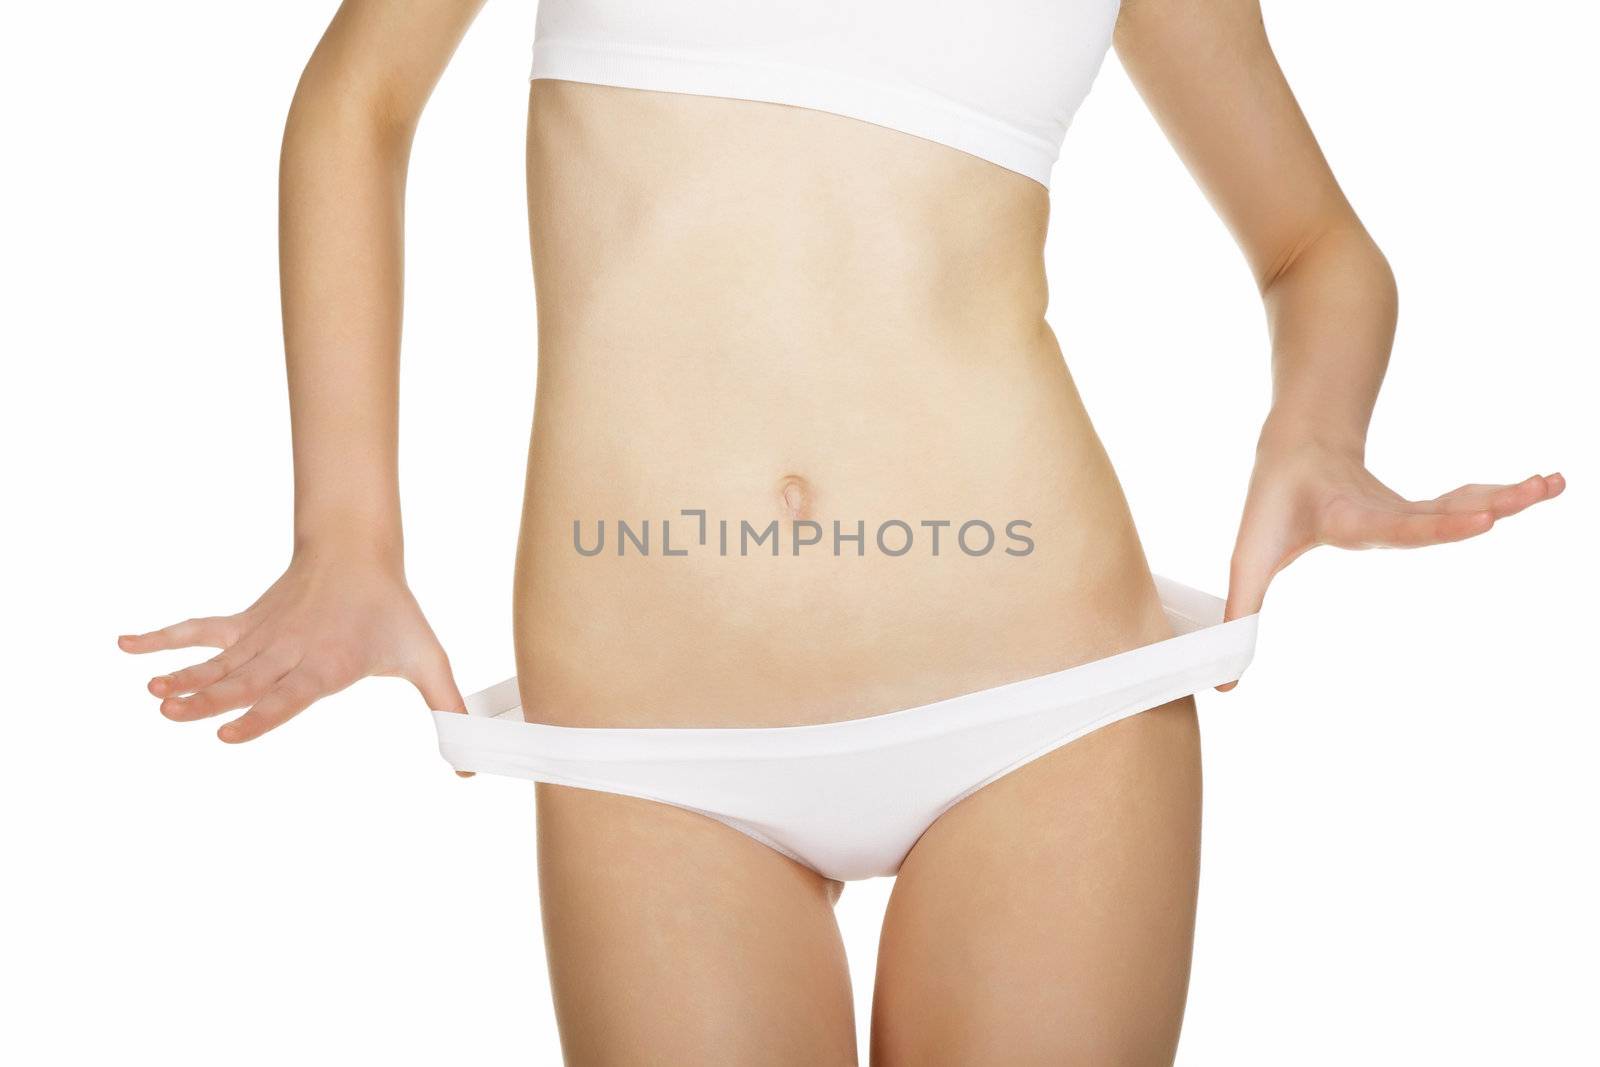 Slim body of the young woman, isolated on white background